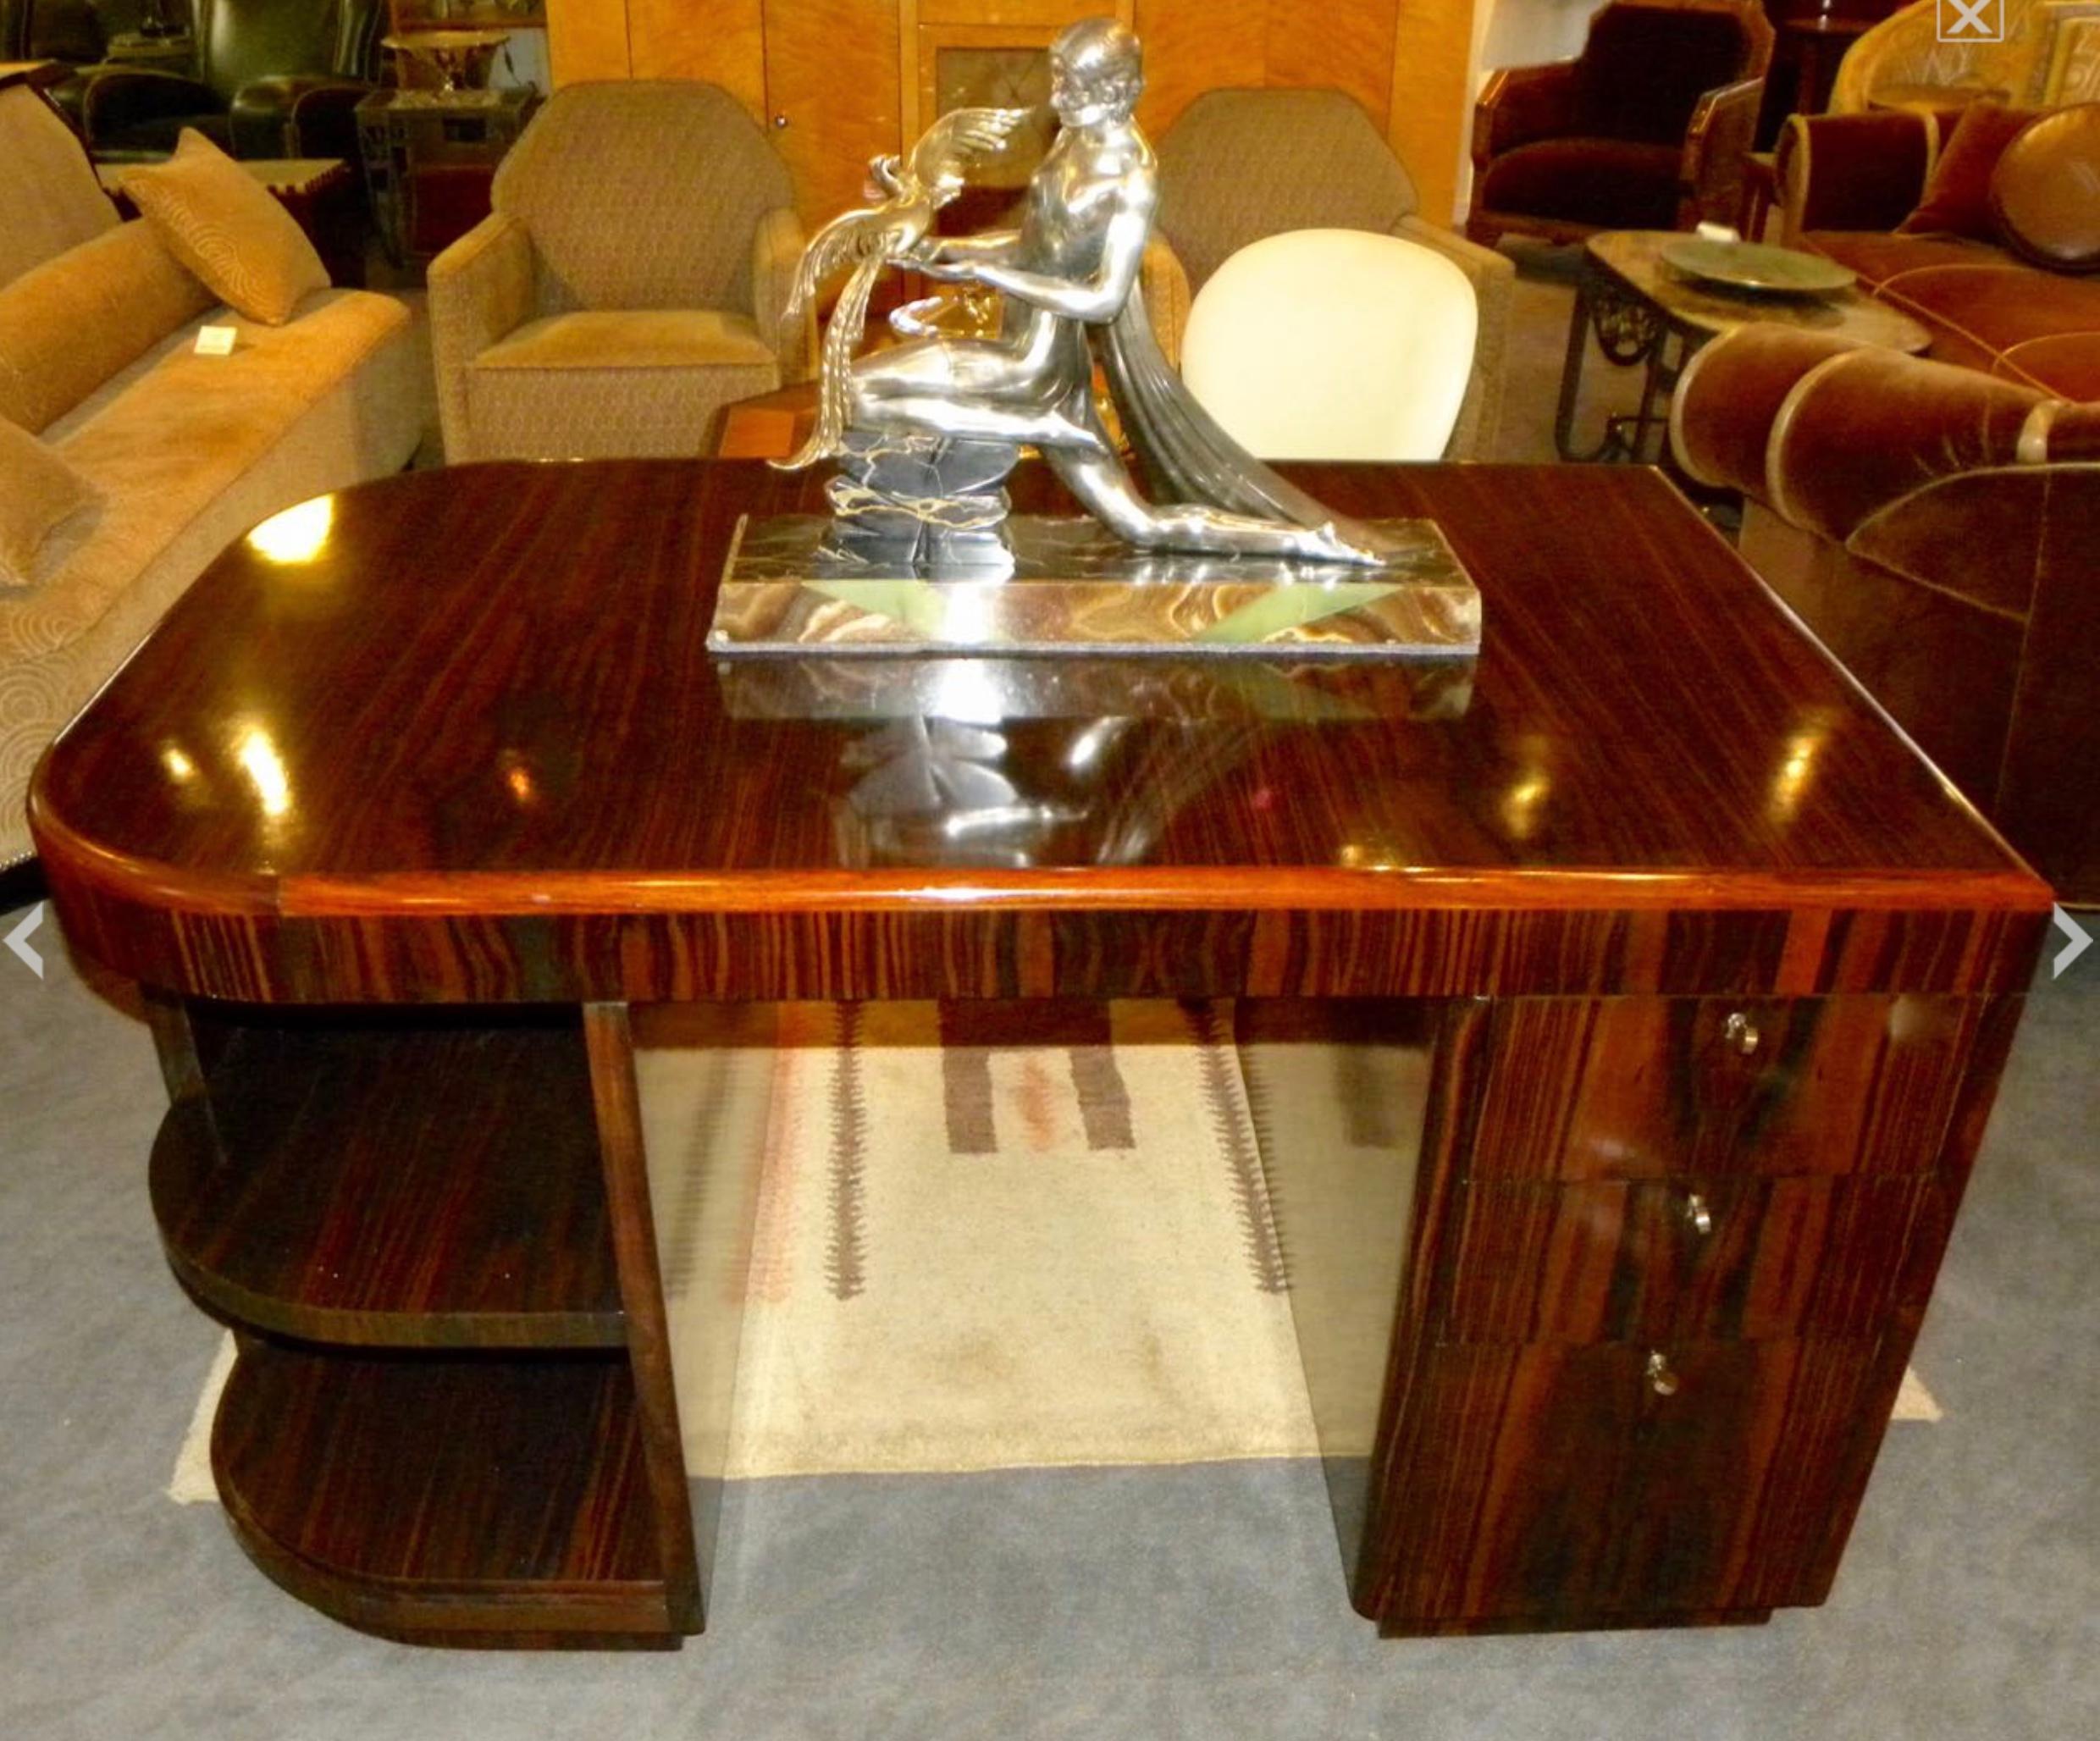 Original French Macassar Art Deco Partners Desk In Good Condition For Sale In Oakland, CA